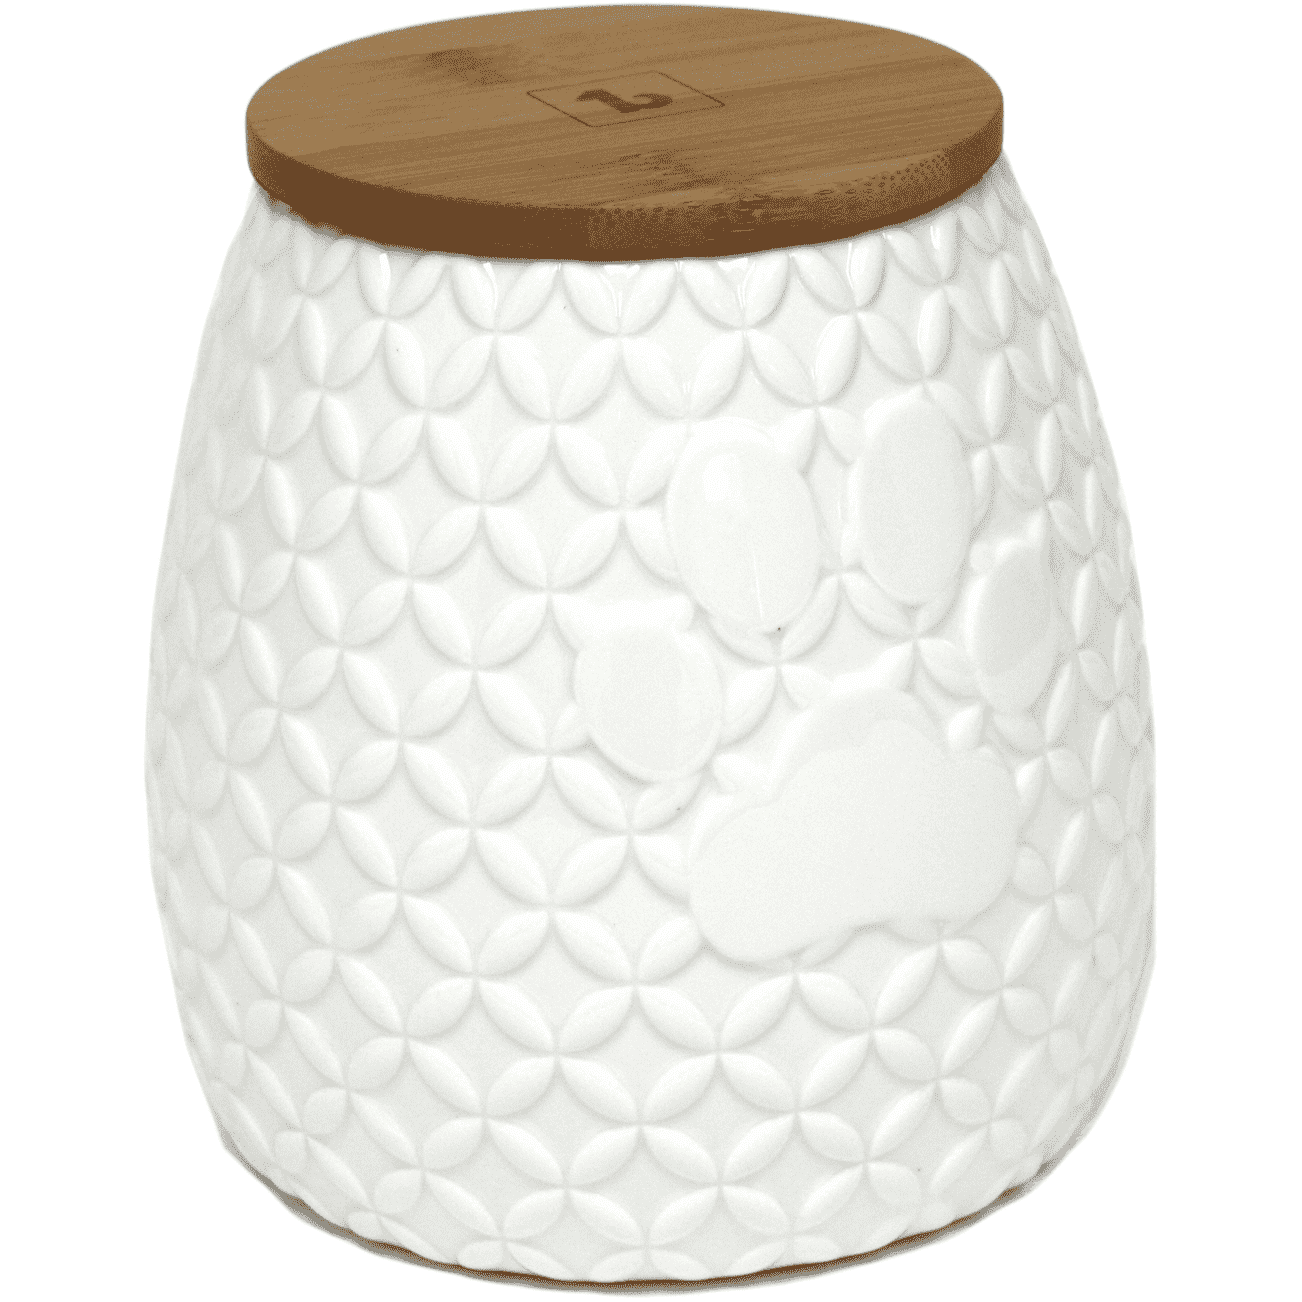 Be One Breed White Porcelain Cookie Jar  Home Decor  | PetMax Canada